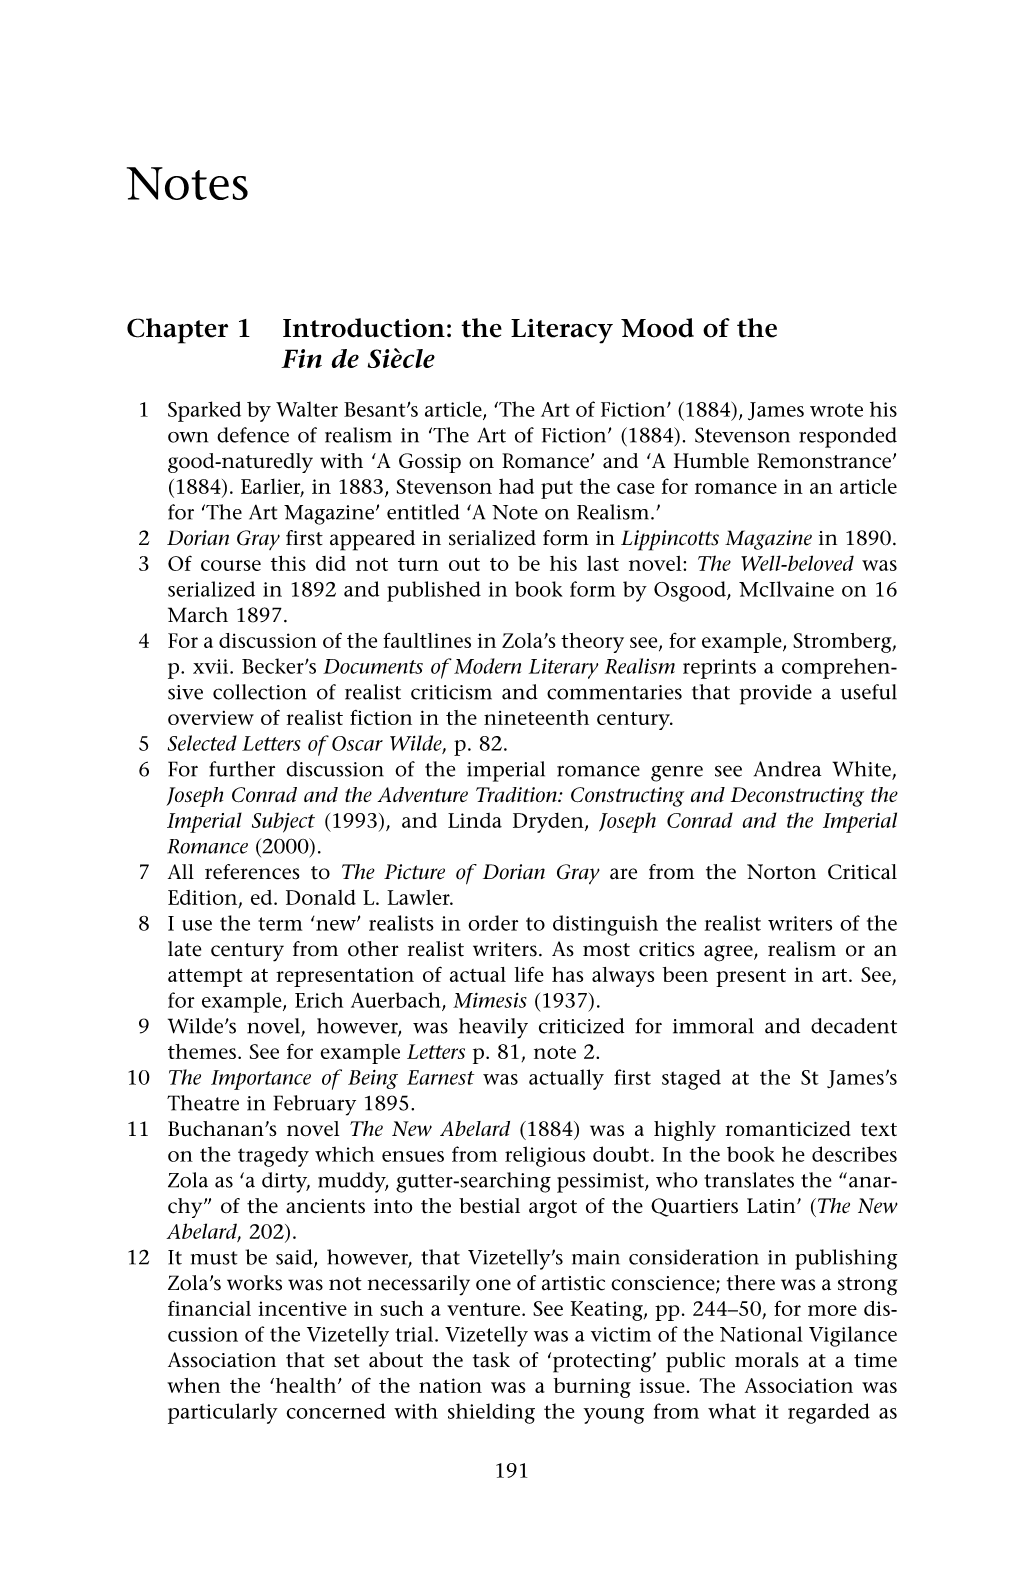 Chapter 1 Introduction: the Literacy Mood of the Fin De Siècle